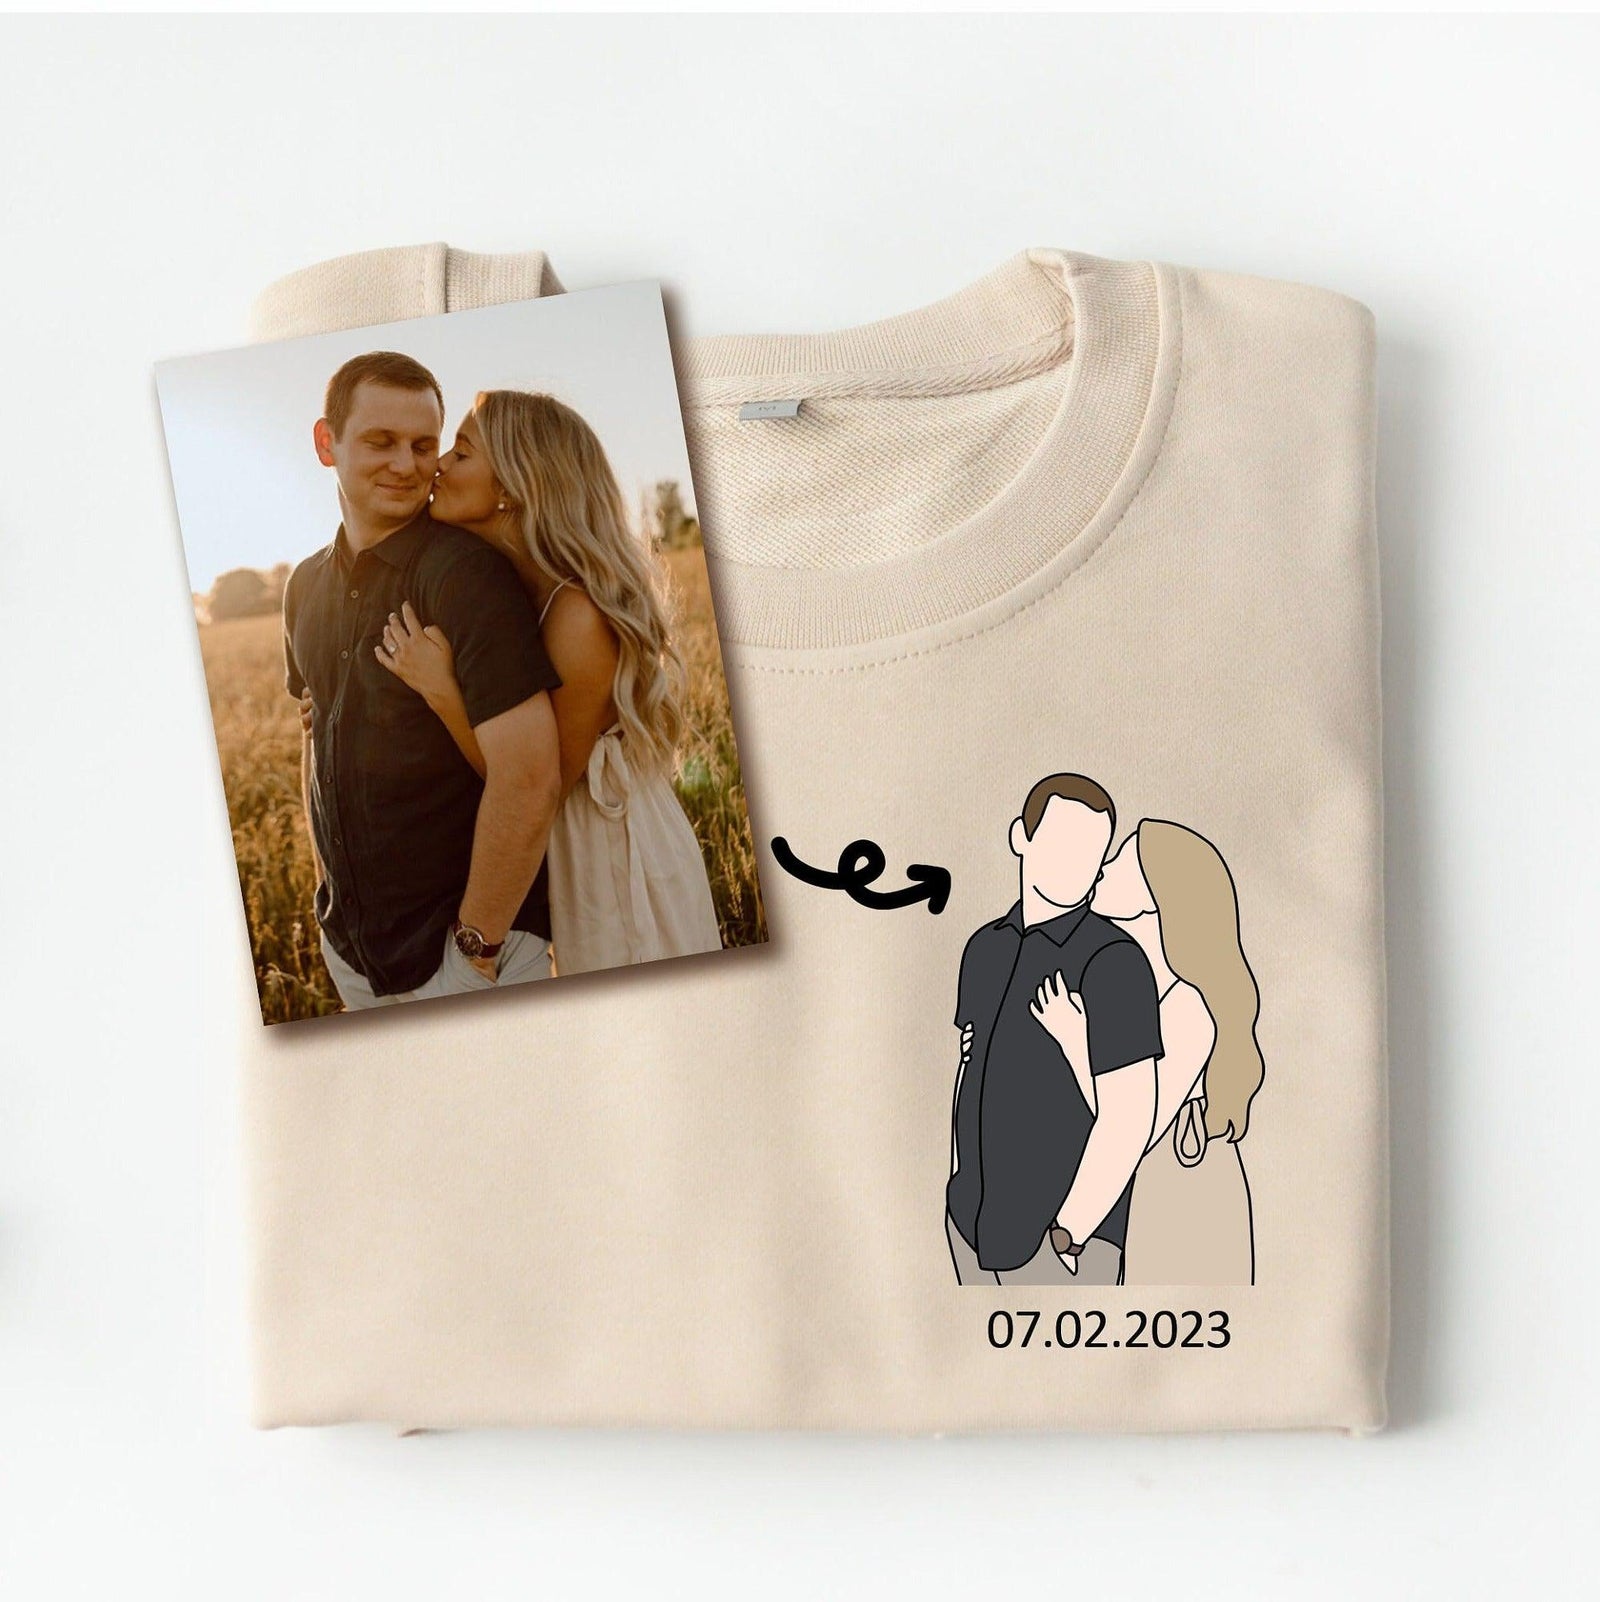 Custom Embroidered Sweatshirts For Couples, Custom Embroidered Portrait Photo Date On Sleeve Matching Couple Embroidered Sweatshirt Hoodie